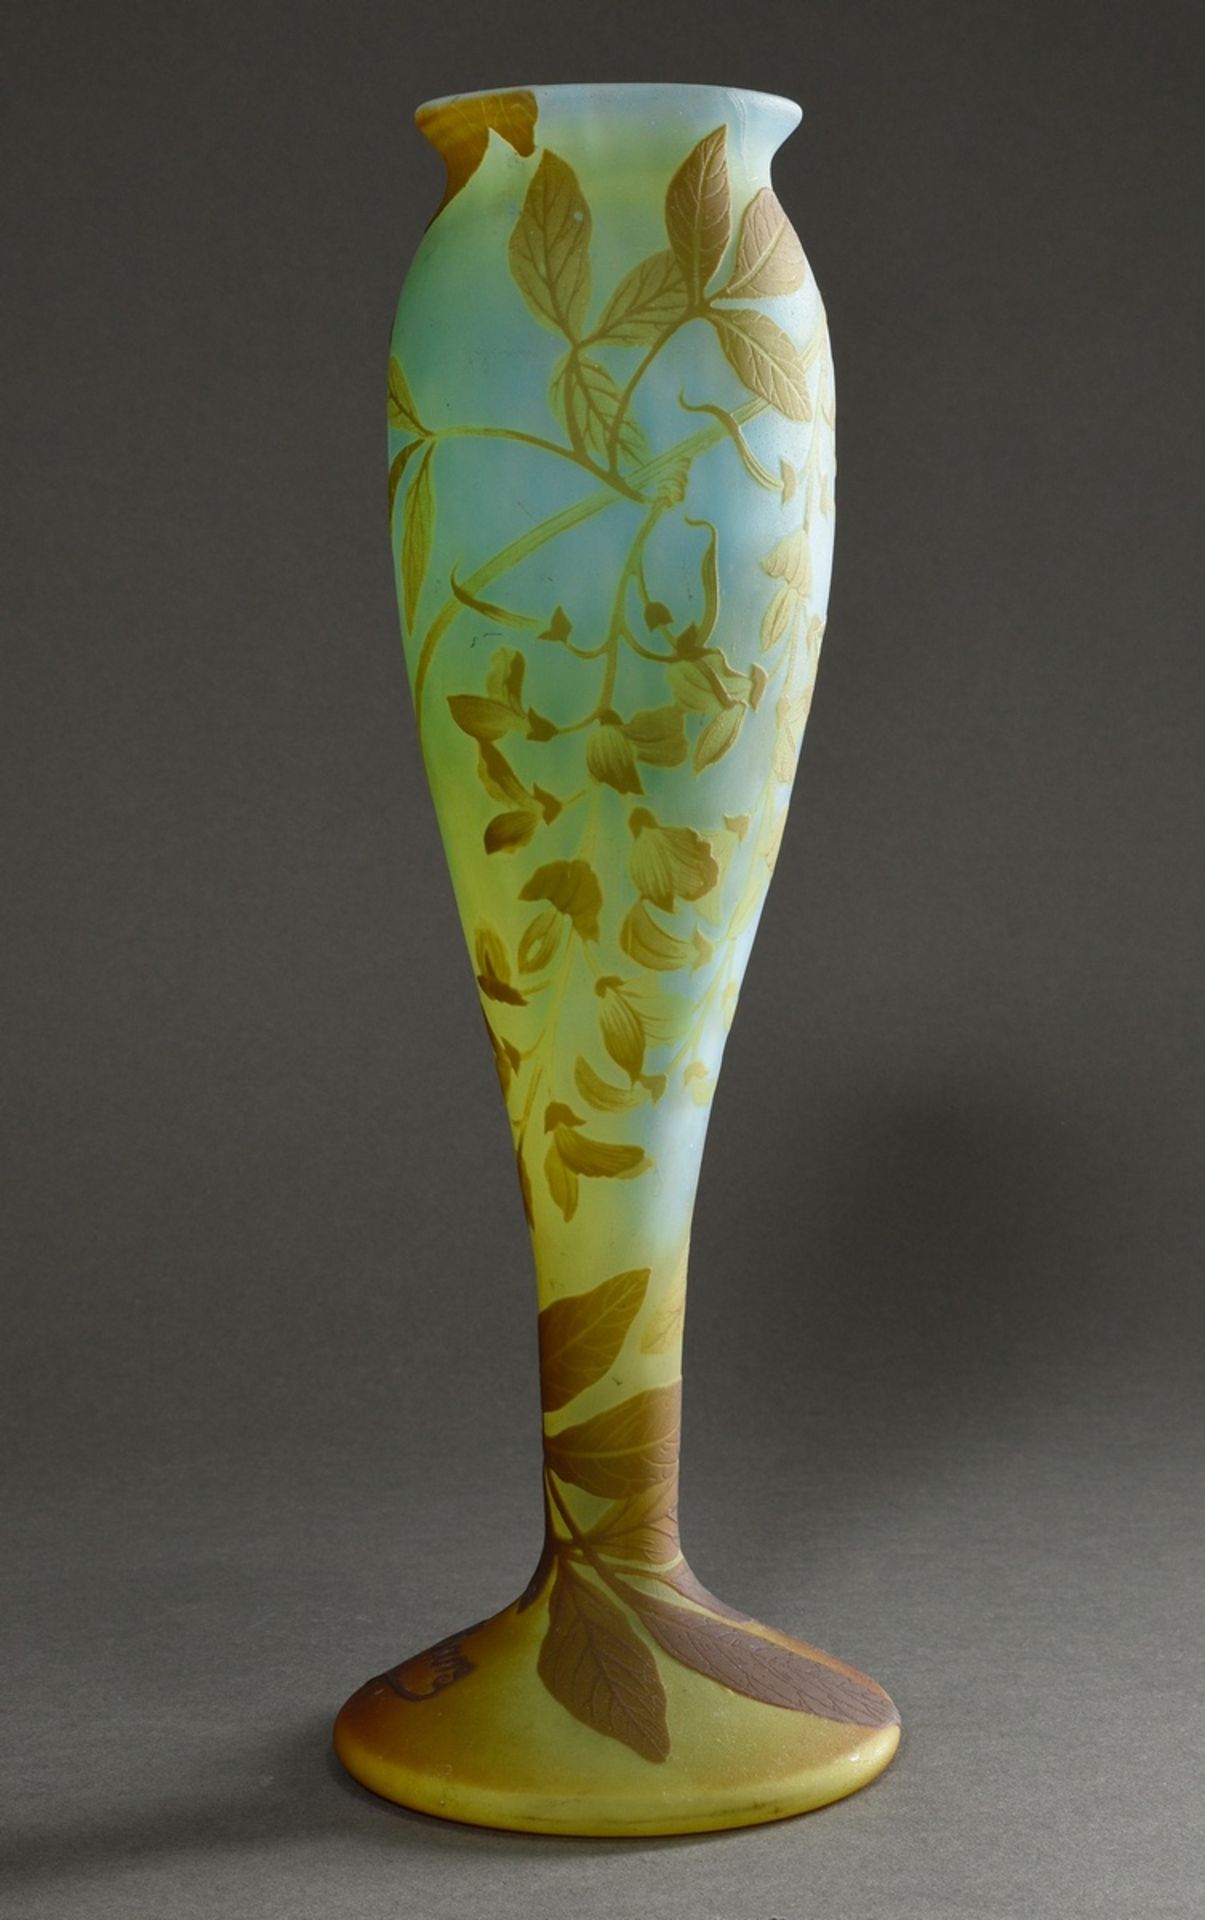 Barz Art Nouveau vase "Wysteria" in blue-green-brown flashed glass, slender baluster shape on a bro - Image 2 of 5